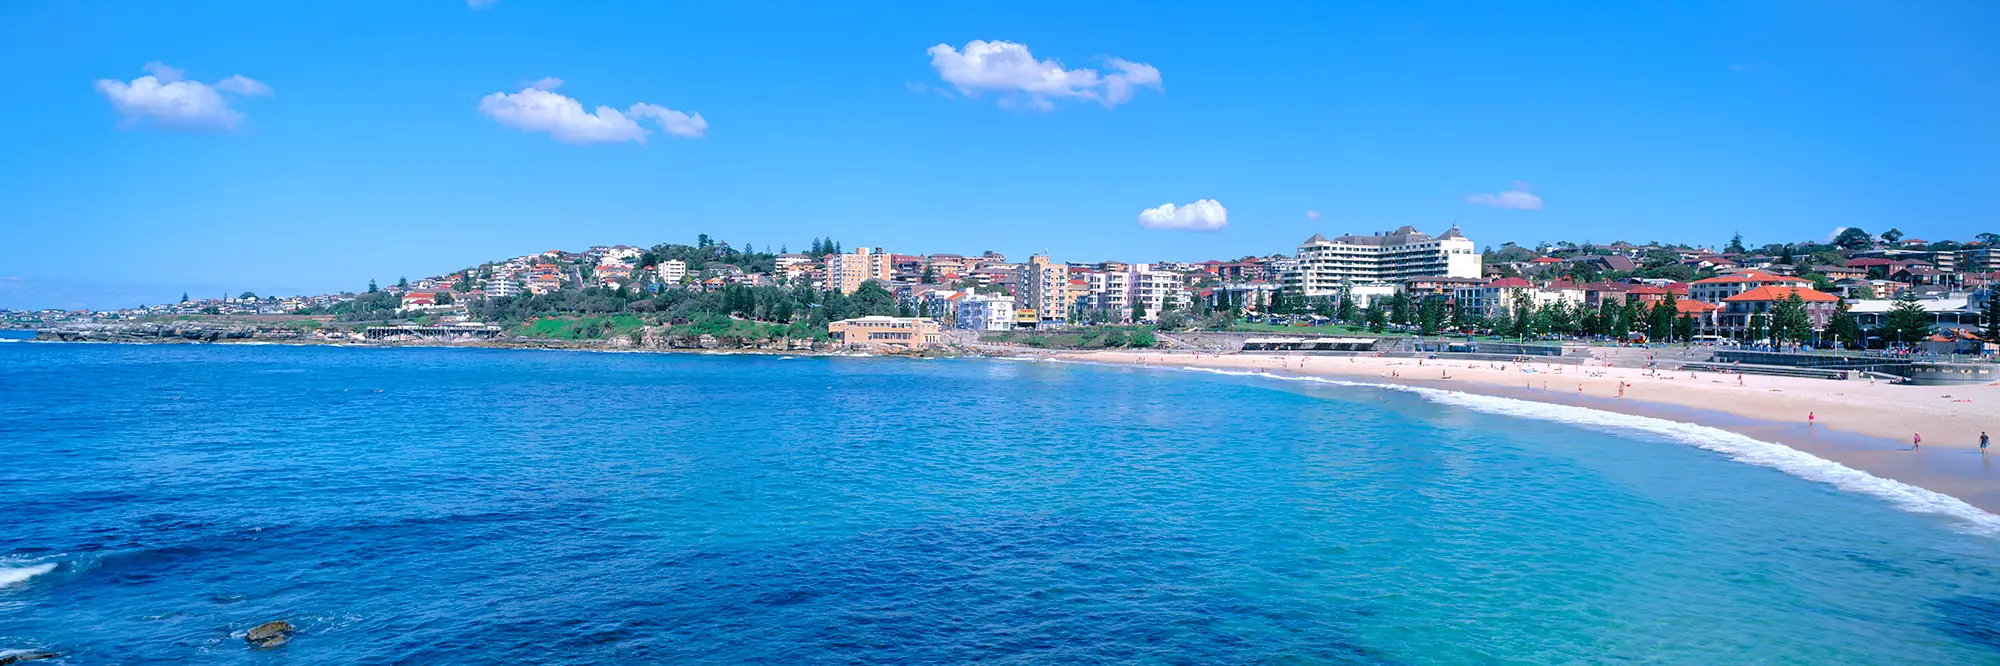 Coogee Beach Panoramic Daytime Landscape Photo